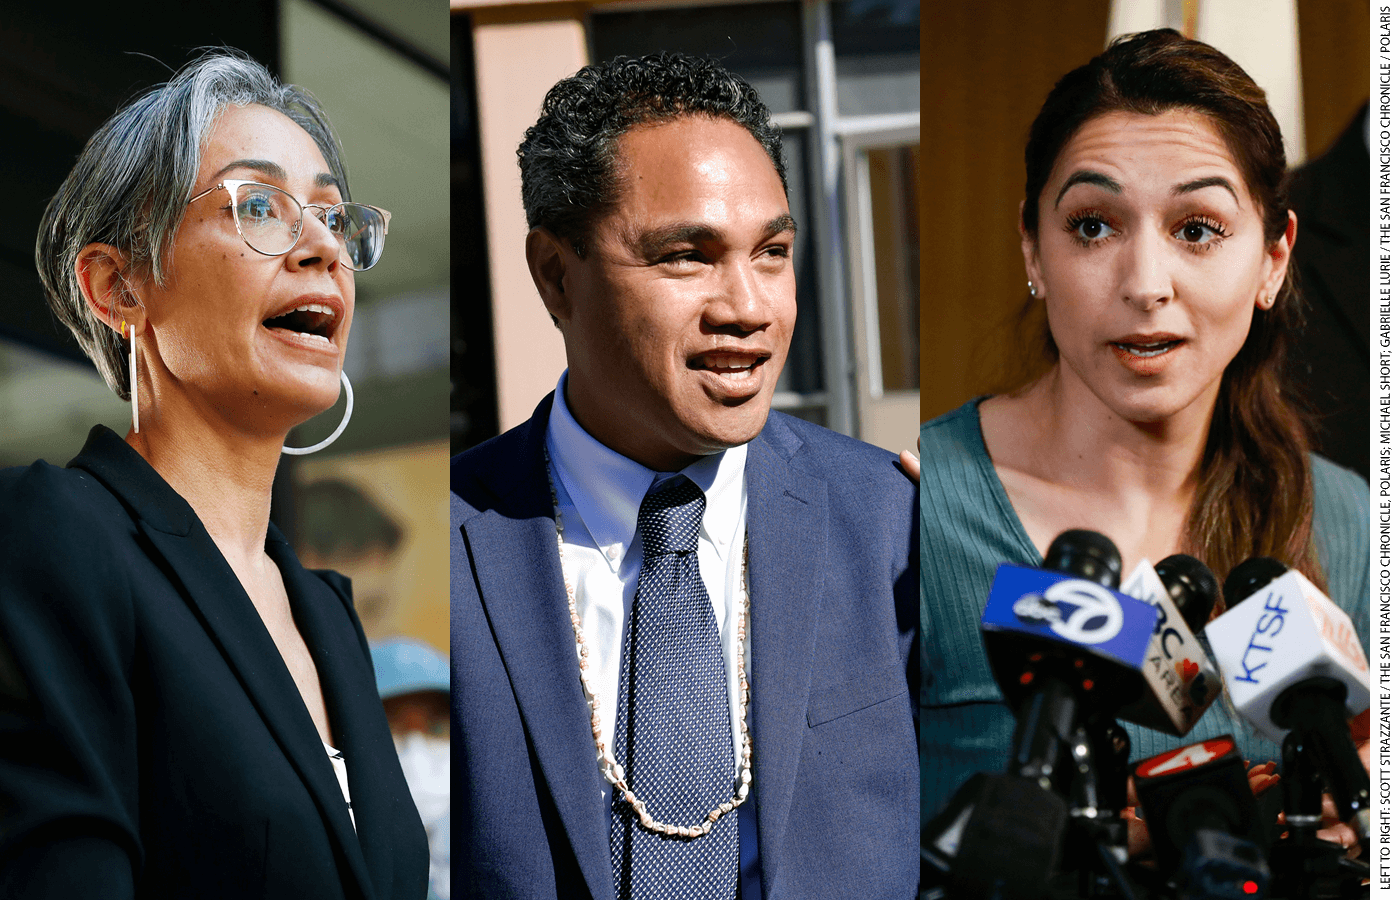 San Francisco school-board members (from left) commissioner Alison Collins, vice president Faauuga Moliga, and president Gabriela López were voted out via recall.